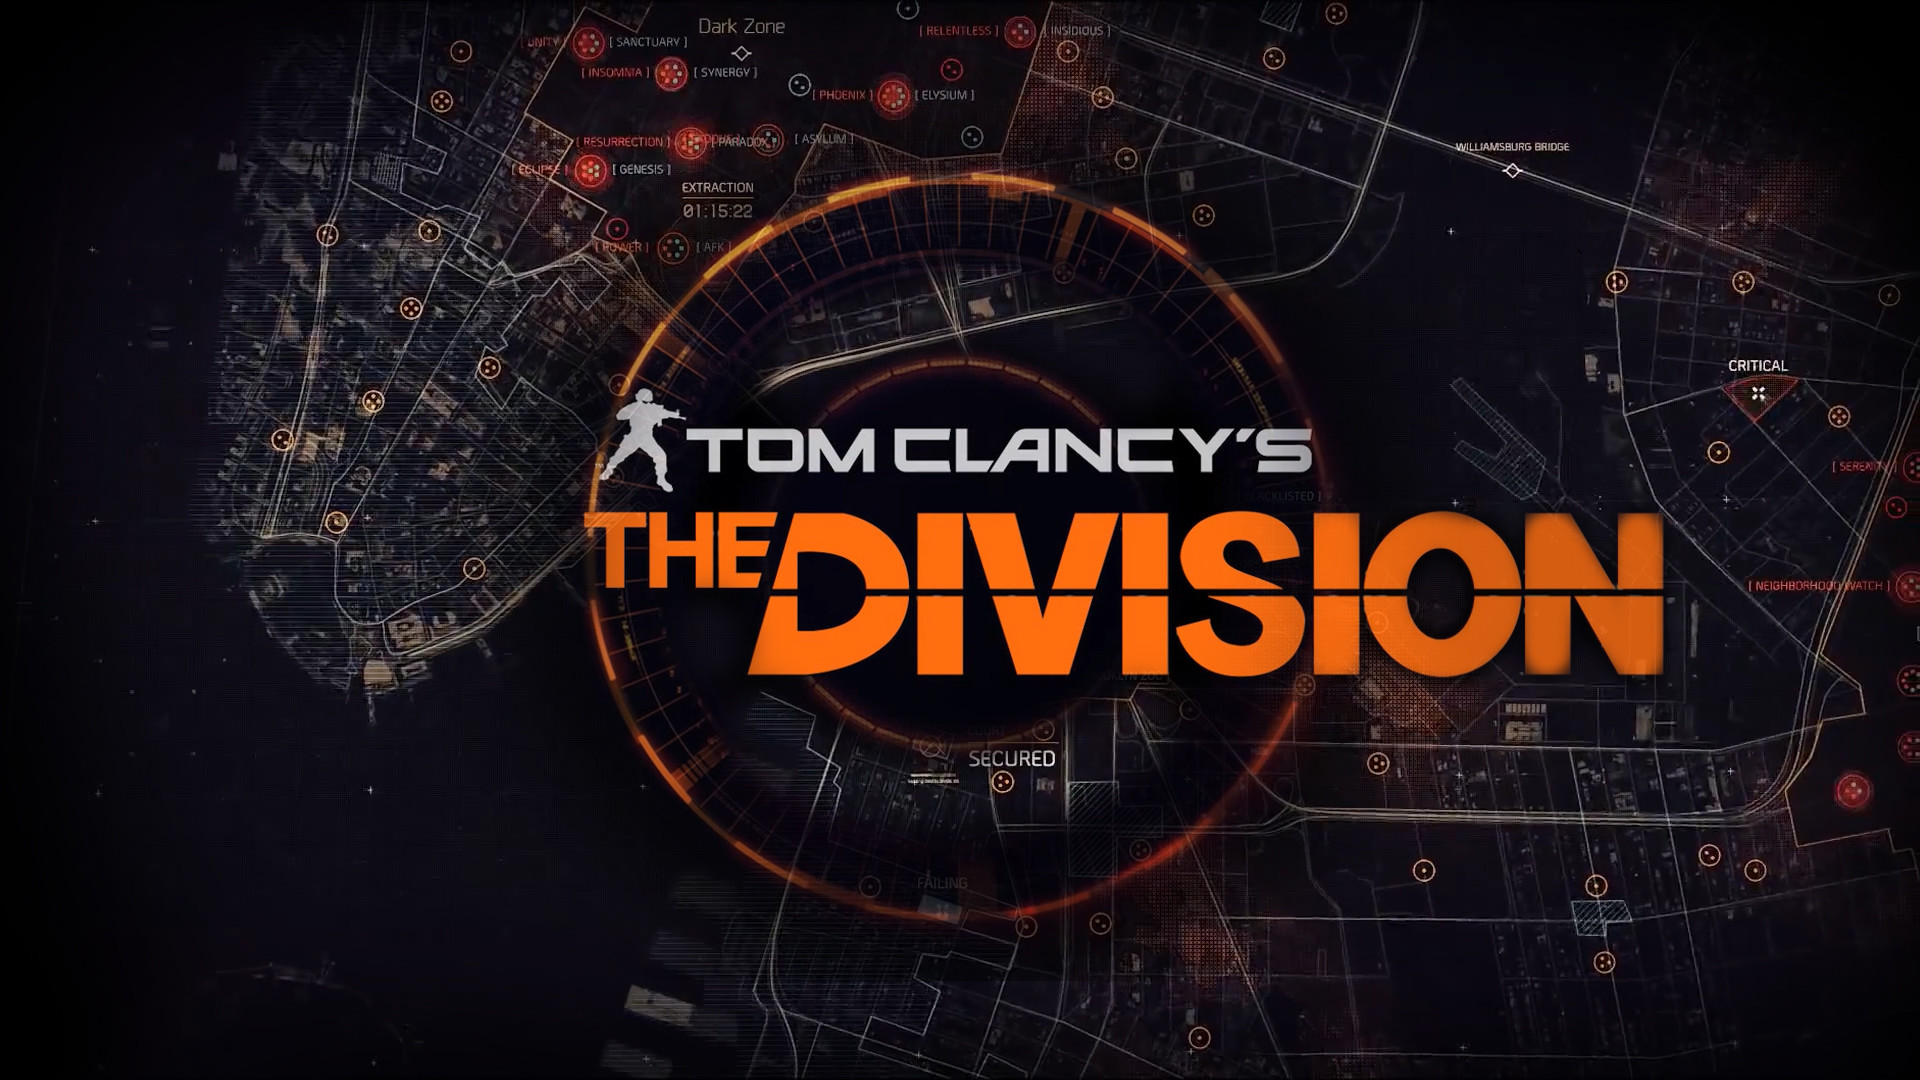 1920x1080 Tom Clancy's The Division Computer Wallpaper